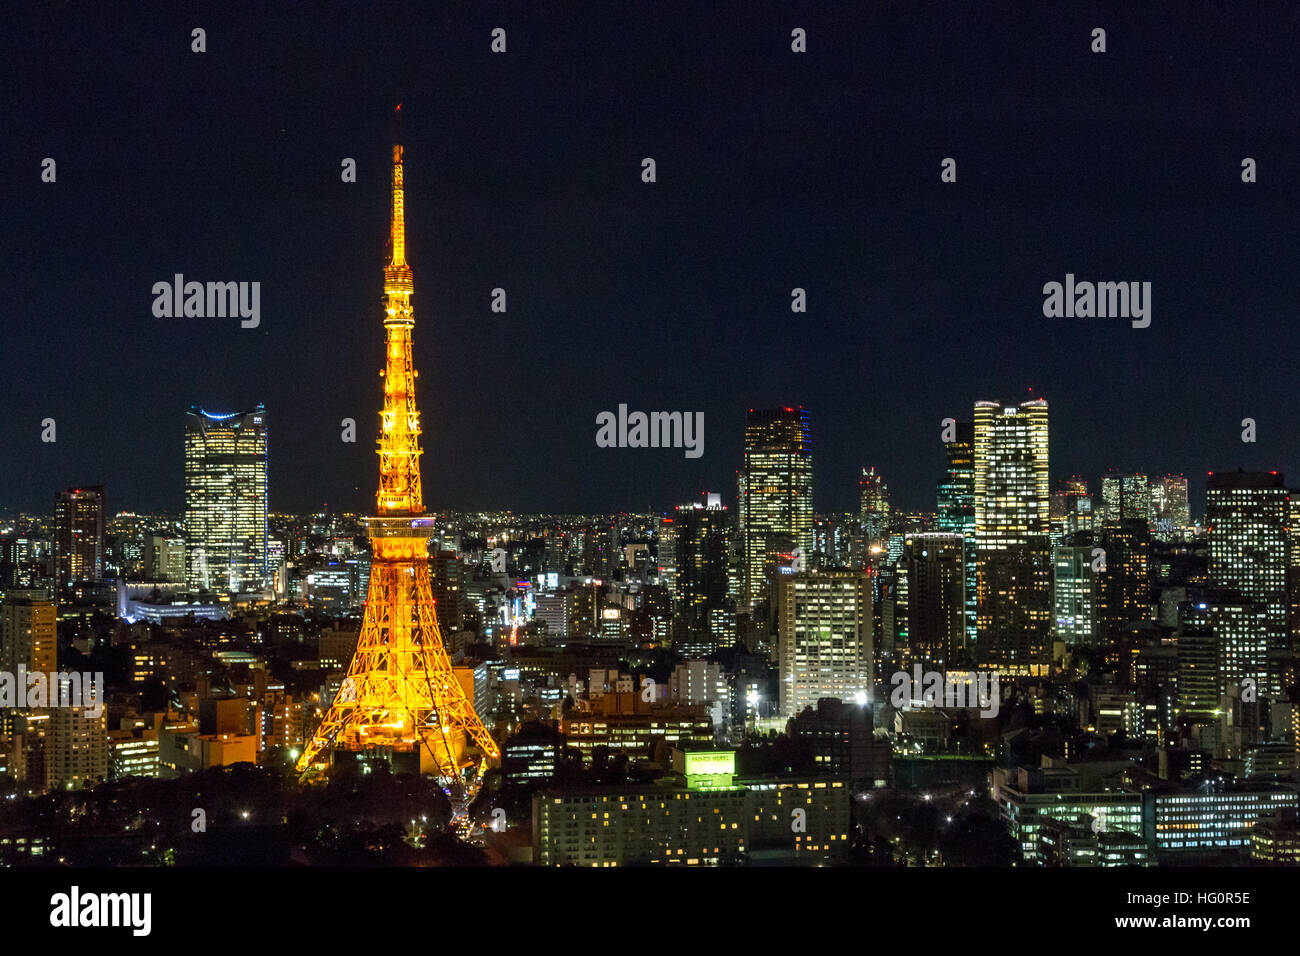 Tokyo, Japan - December 18, 2014: Night view of the skyline with Tokyo Tower taken from the World Trade Center Stock Photo